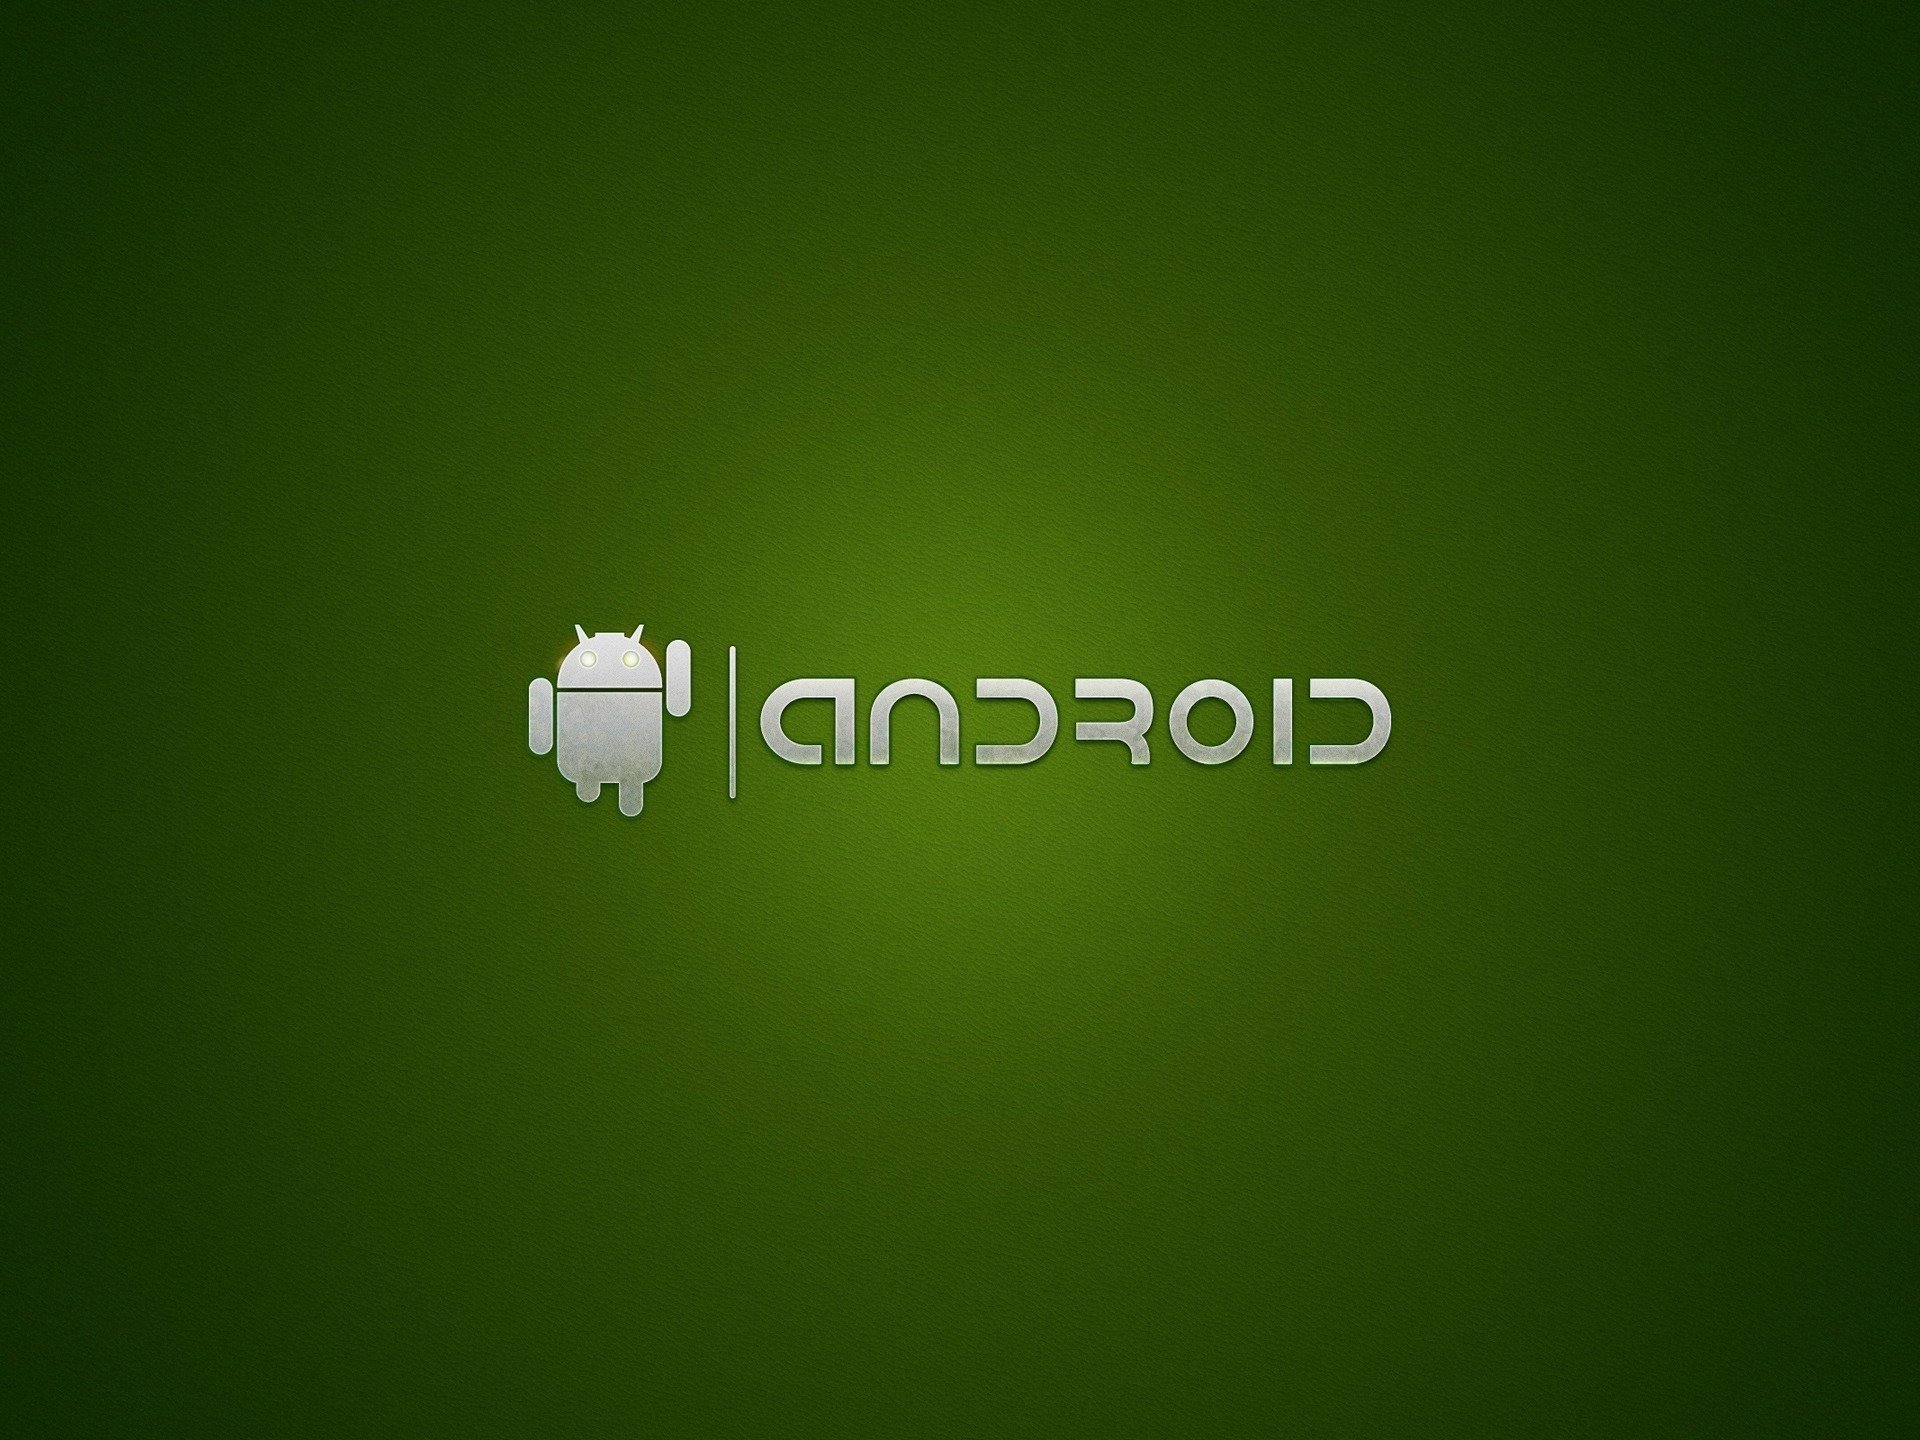 Android wallpapers hd free download for pc